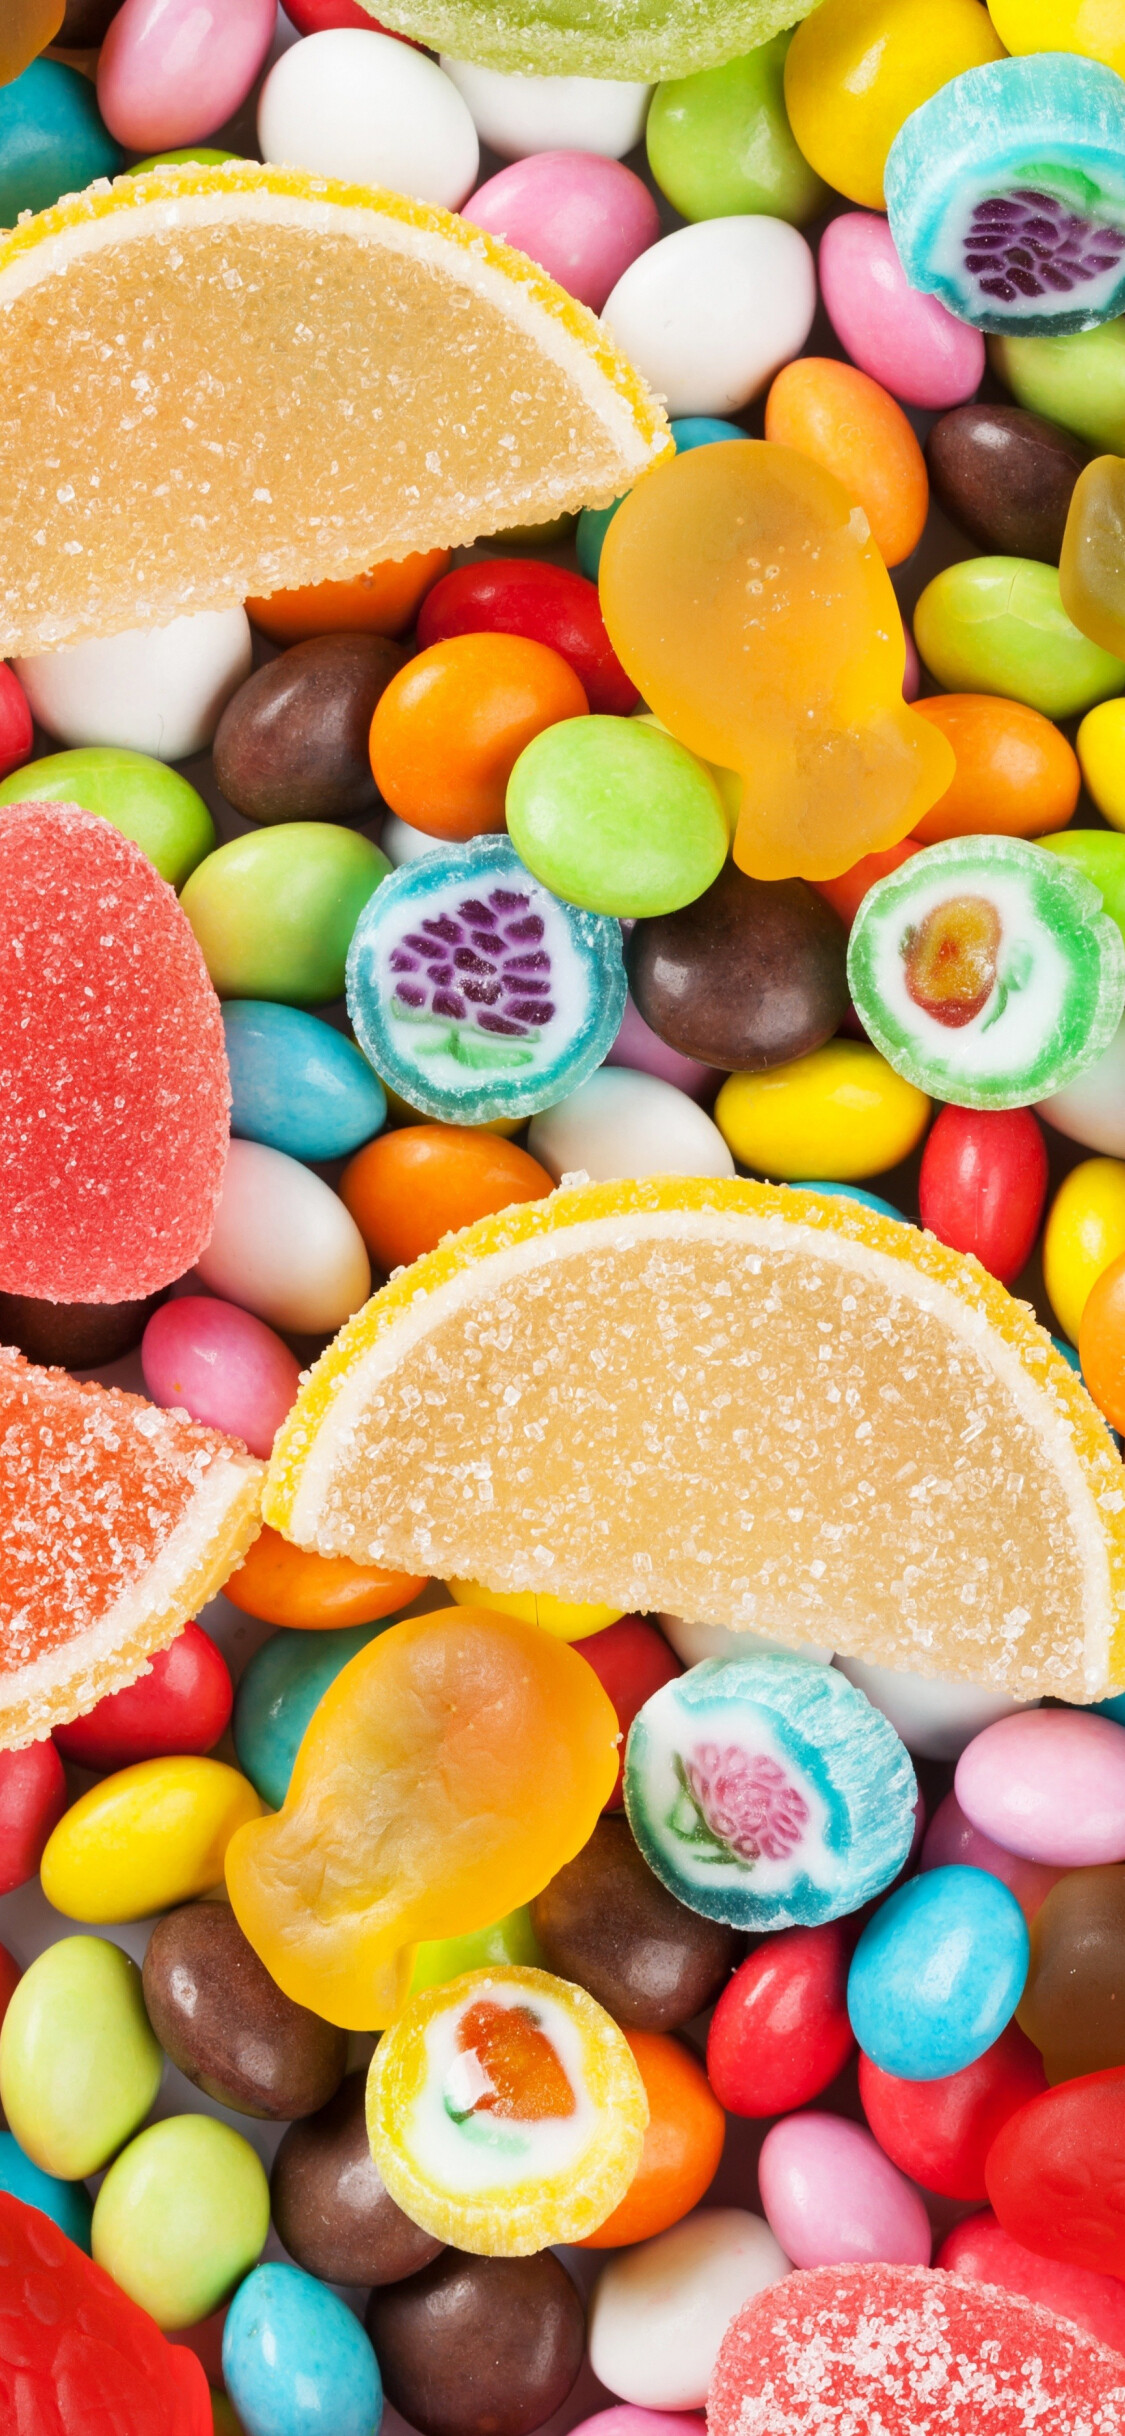 Sweets: Jelly fruits slices, Skittles, Gummies, Assorted candies. 1130x2440 HD Wallpaper.